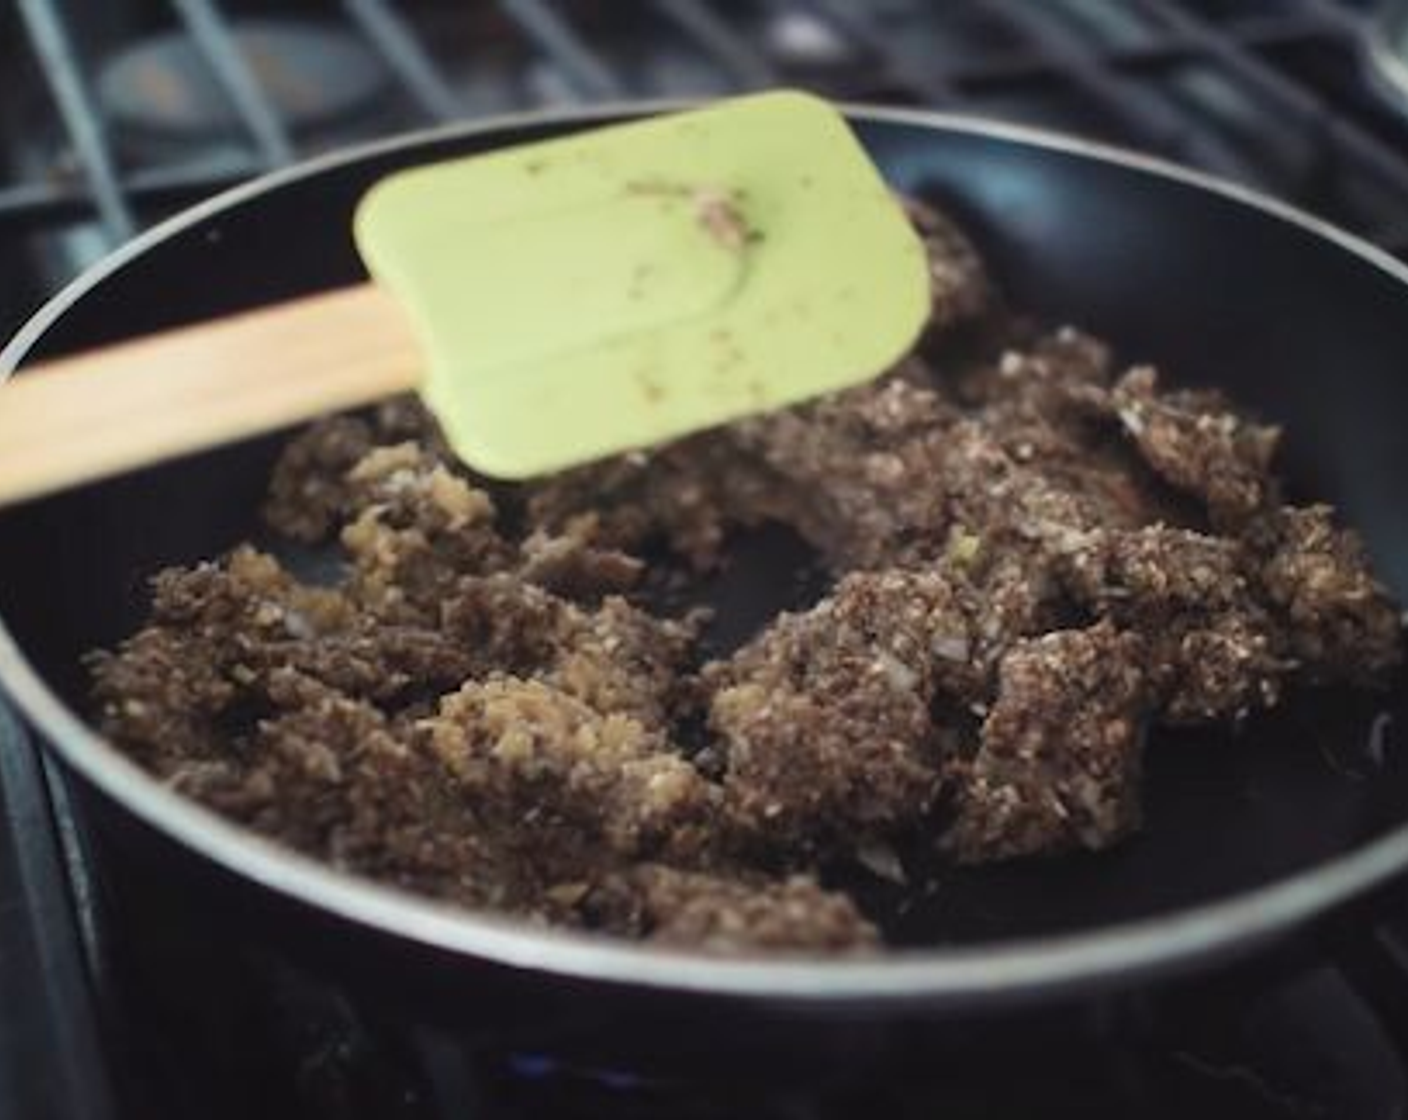 step 2 Place a large saucepan or frying pan over a medium heat with a touch of Vegetable Oil (1 Tbsp) and add the blitzed ingredients with Sea Salt (1/2 Tbsp) and Ground Black Pepper (1 tsp).